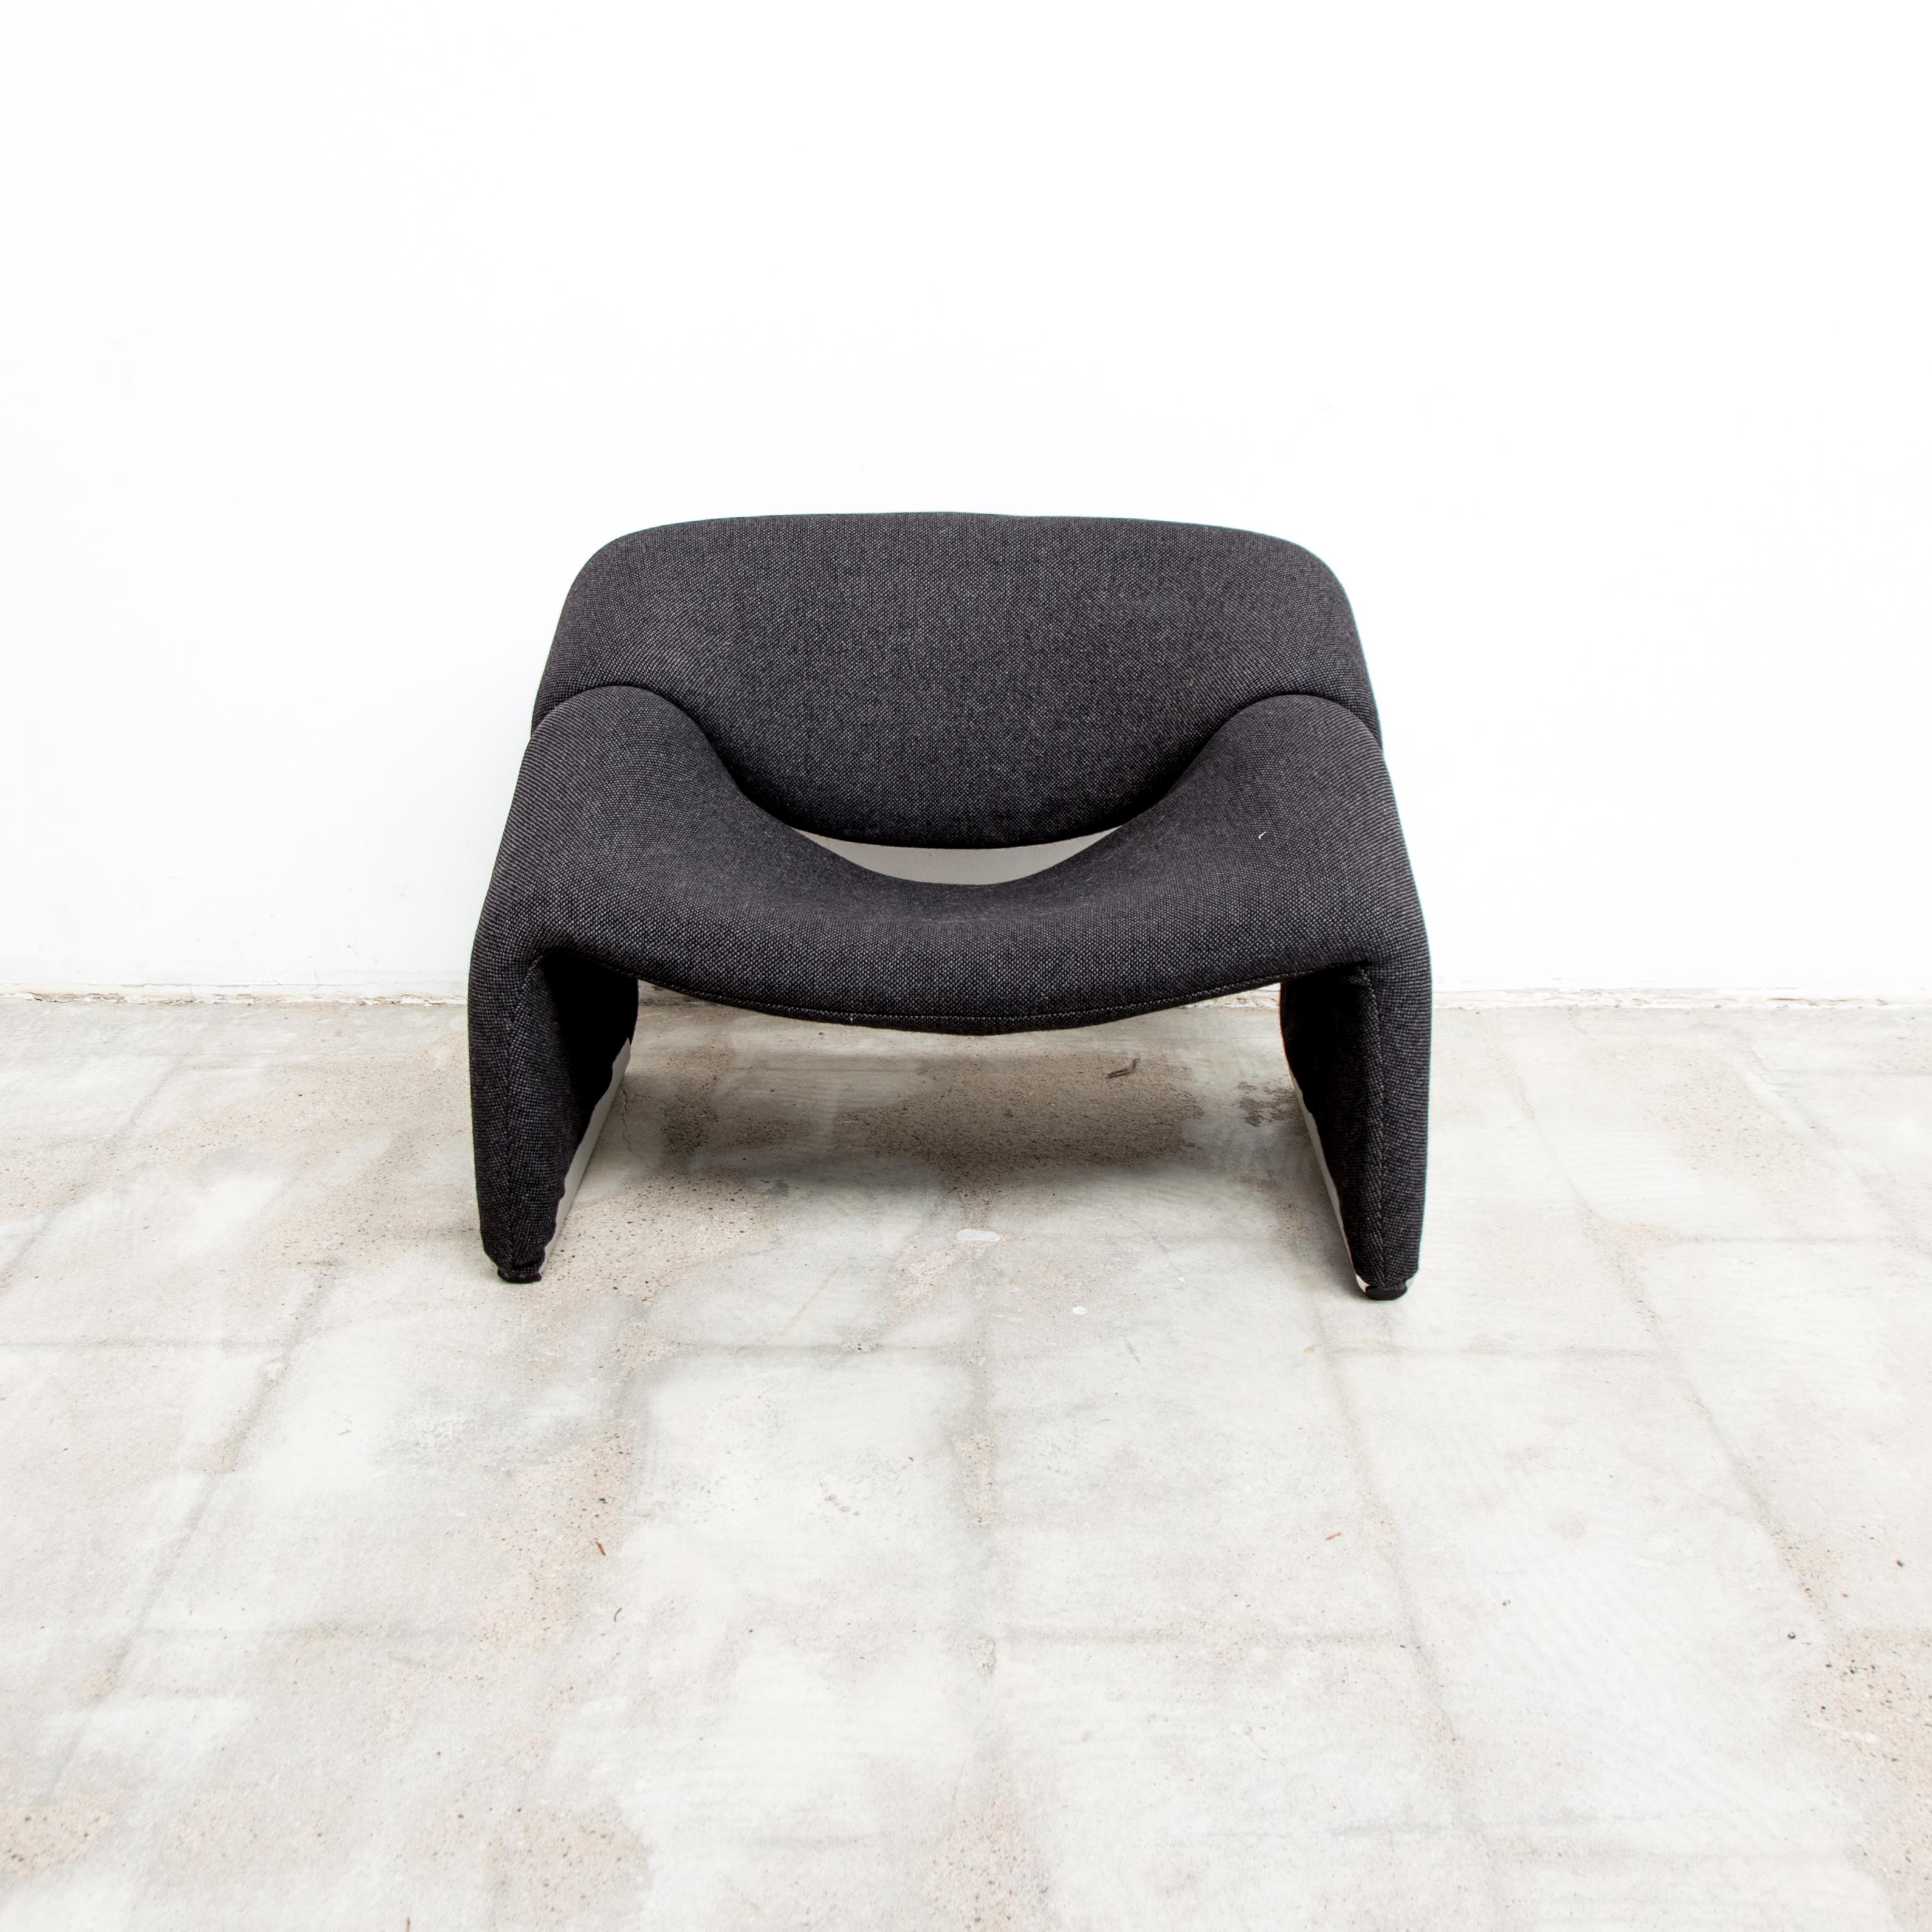 Wool upholstering in original ‘de Ploeg’ fabric anthracite/dark brown. The groovy chair – or F598 – was designed in 1973 by France’s top designer Pierre Paulin for Holland’s most avant-garde furniture maker Artifort. Their compactness combined with